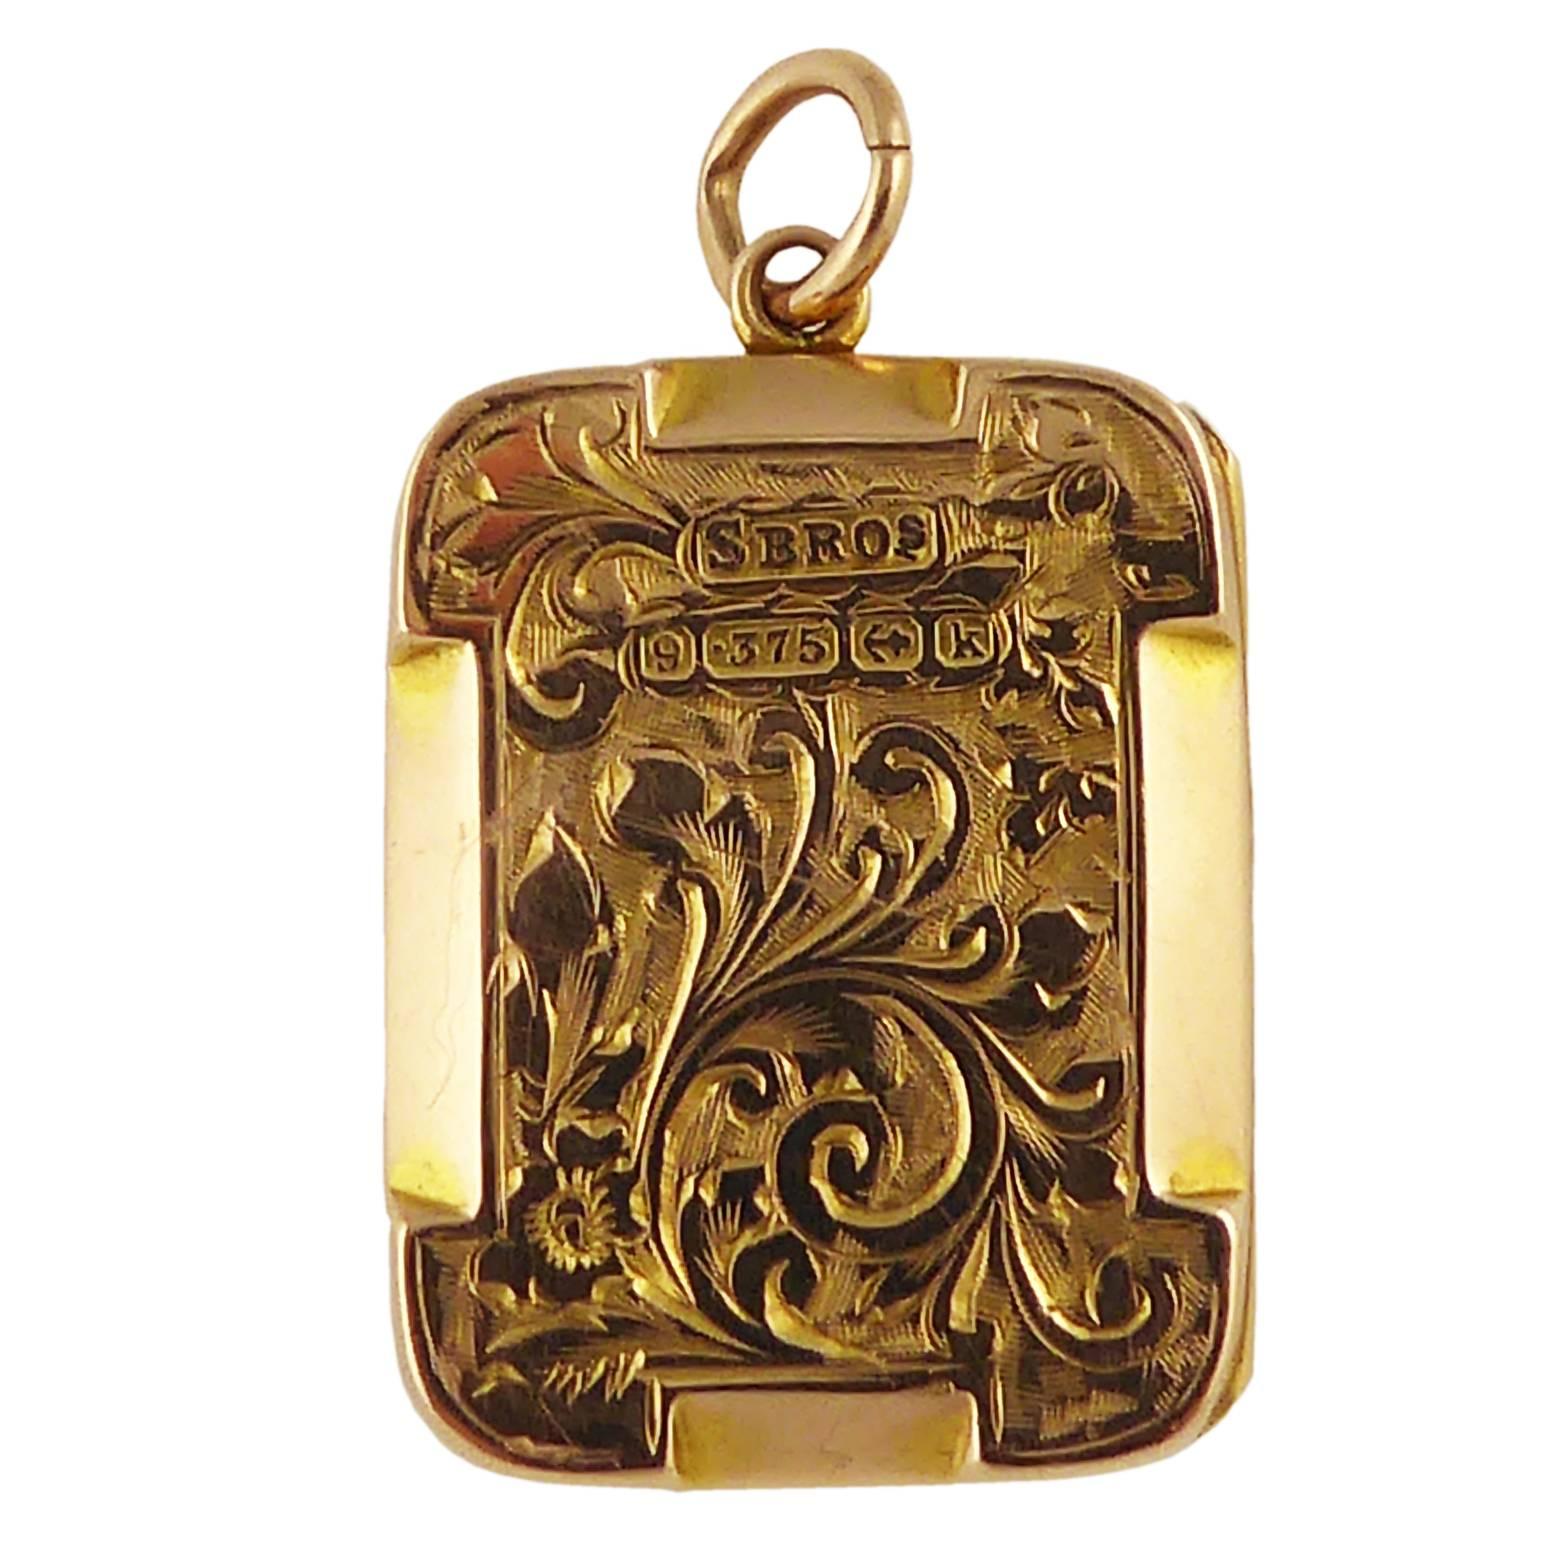 Beautifully hand engraved in a floral and scroll work pattern, this antique locket dates from 1909.  The overall square shape is softened by the rounded corners.  It stands apart fron the more often seen locket by its chamfered details to the edges.